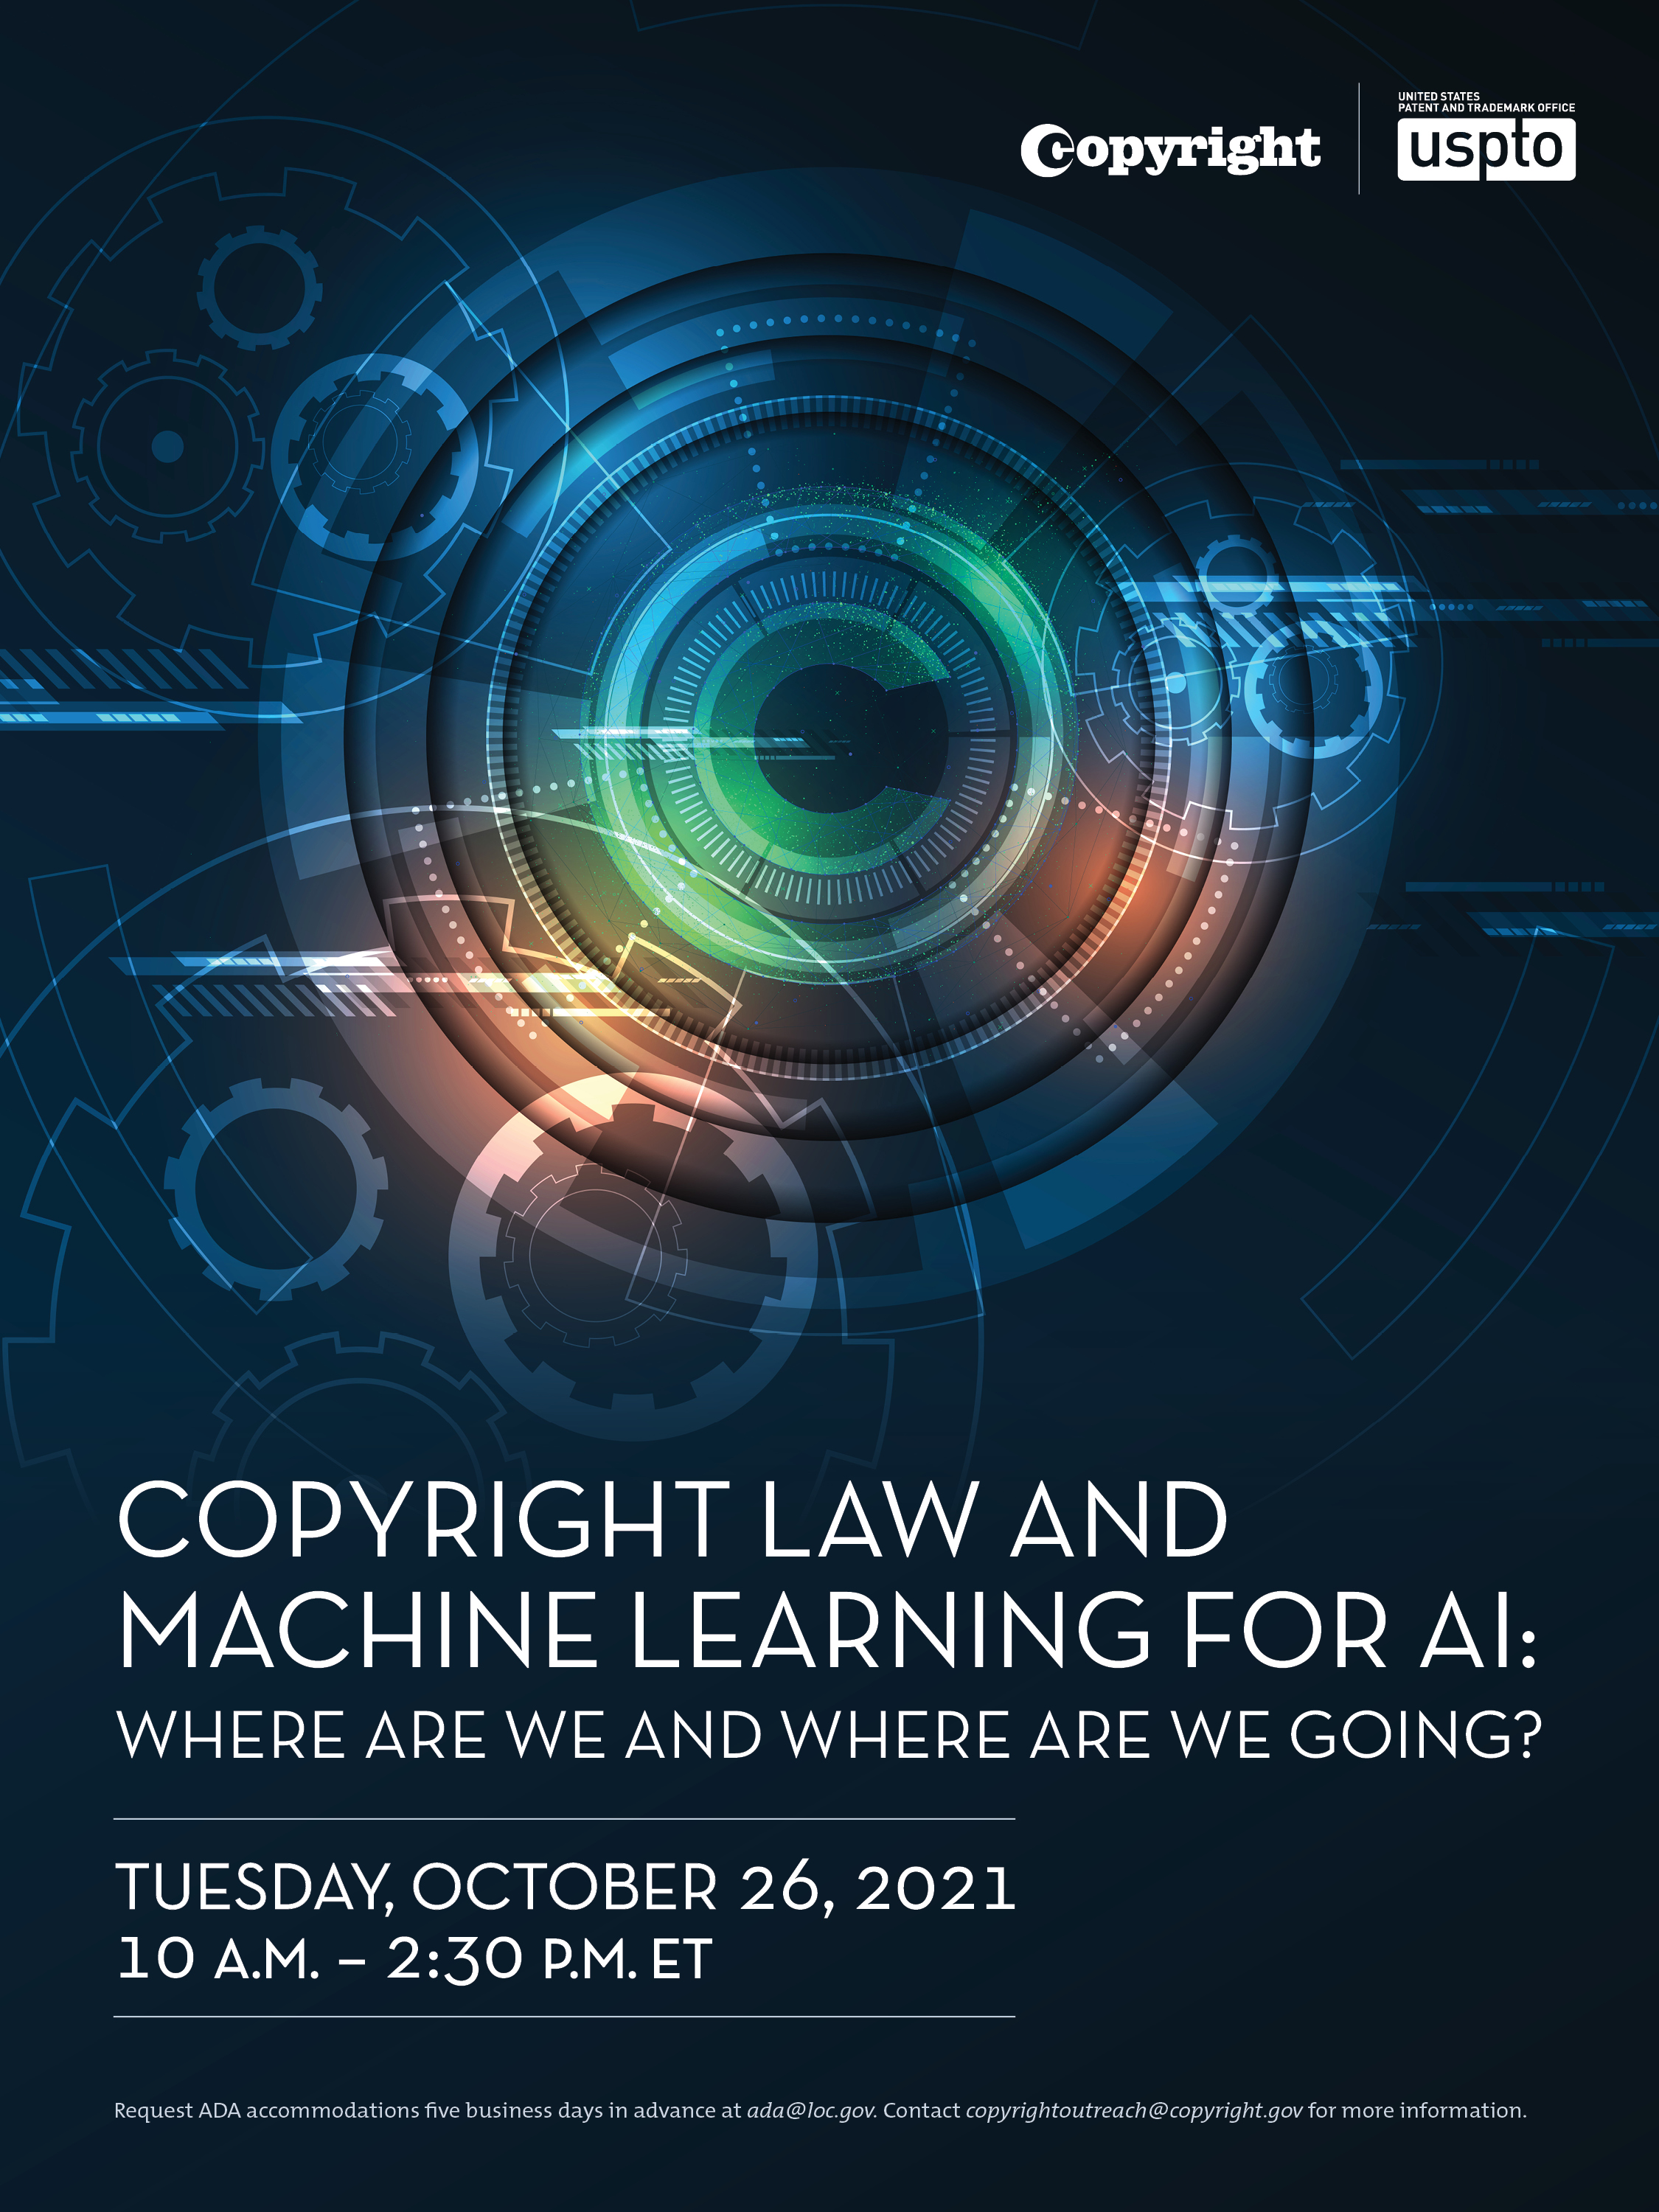 Copyright Law and Machine Learning for AI: Where Are We and Where Are We Going?. Tuesday, October 26, 2021. 10 A.M. - 2:30 P.M. ET